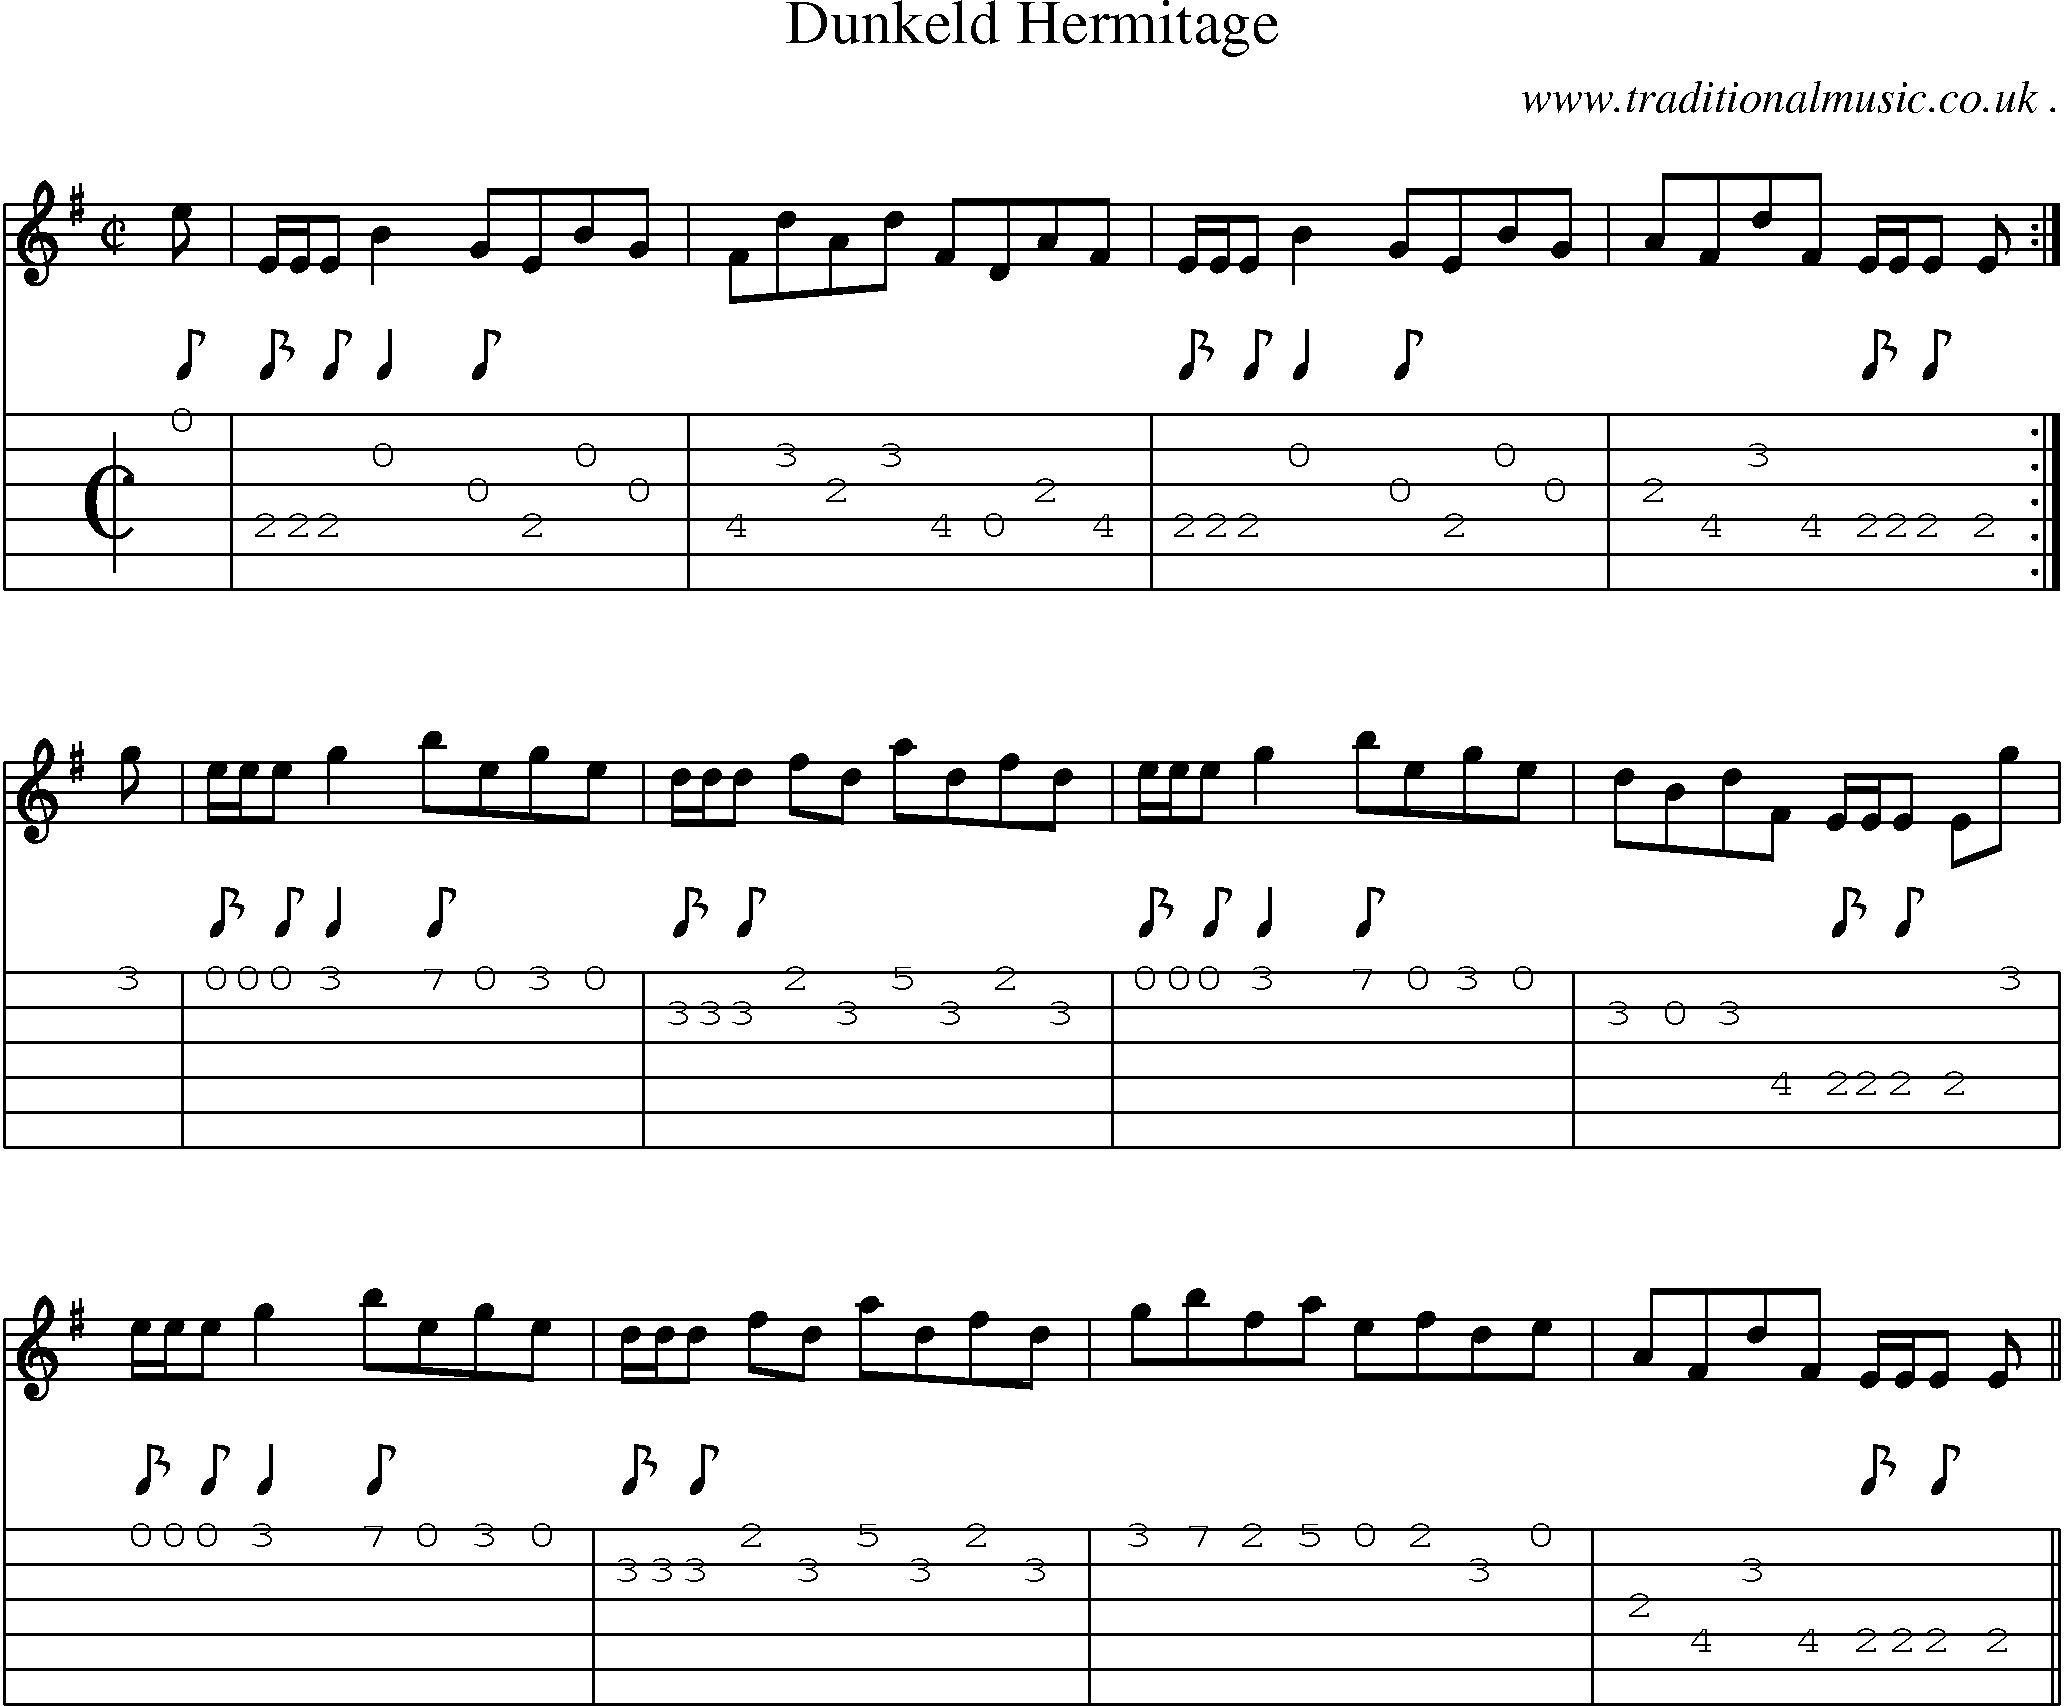 Sheet-music  score, Chords and Guitar Tabs for Dunkeld Hermitage